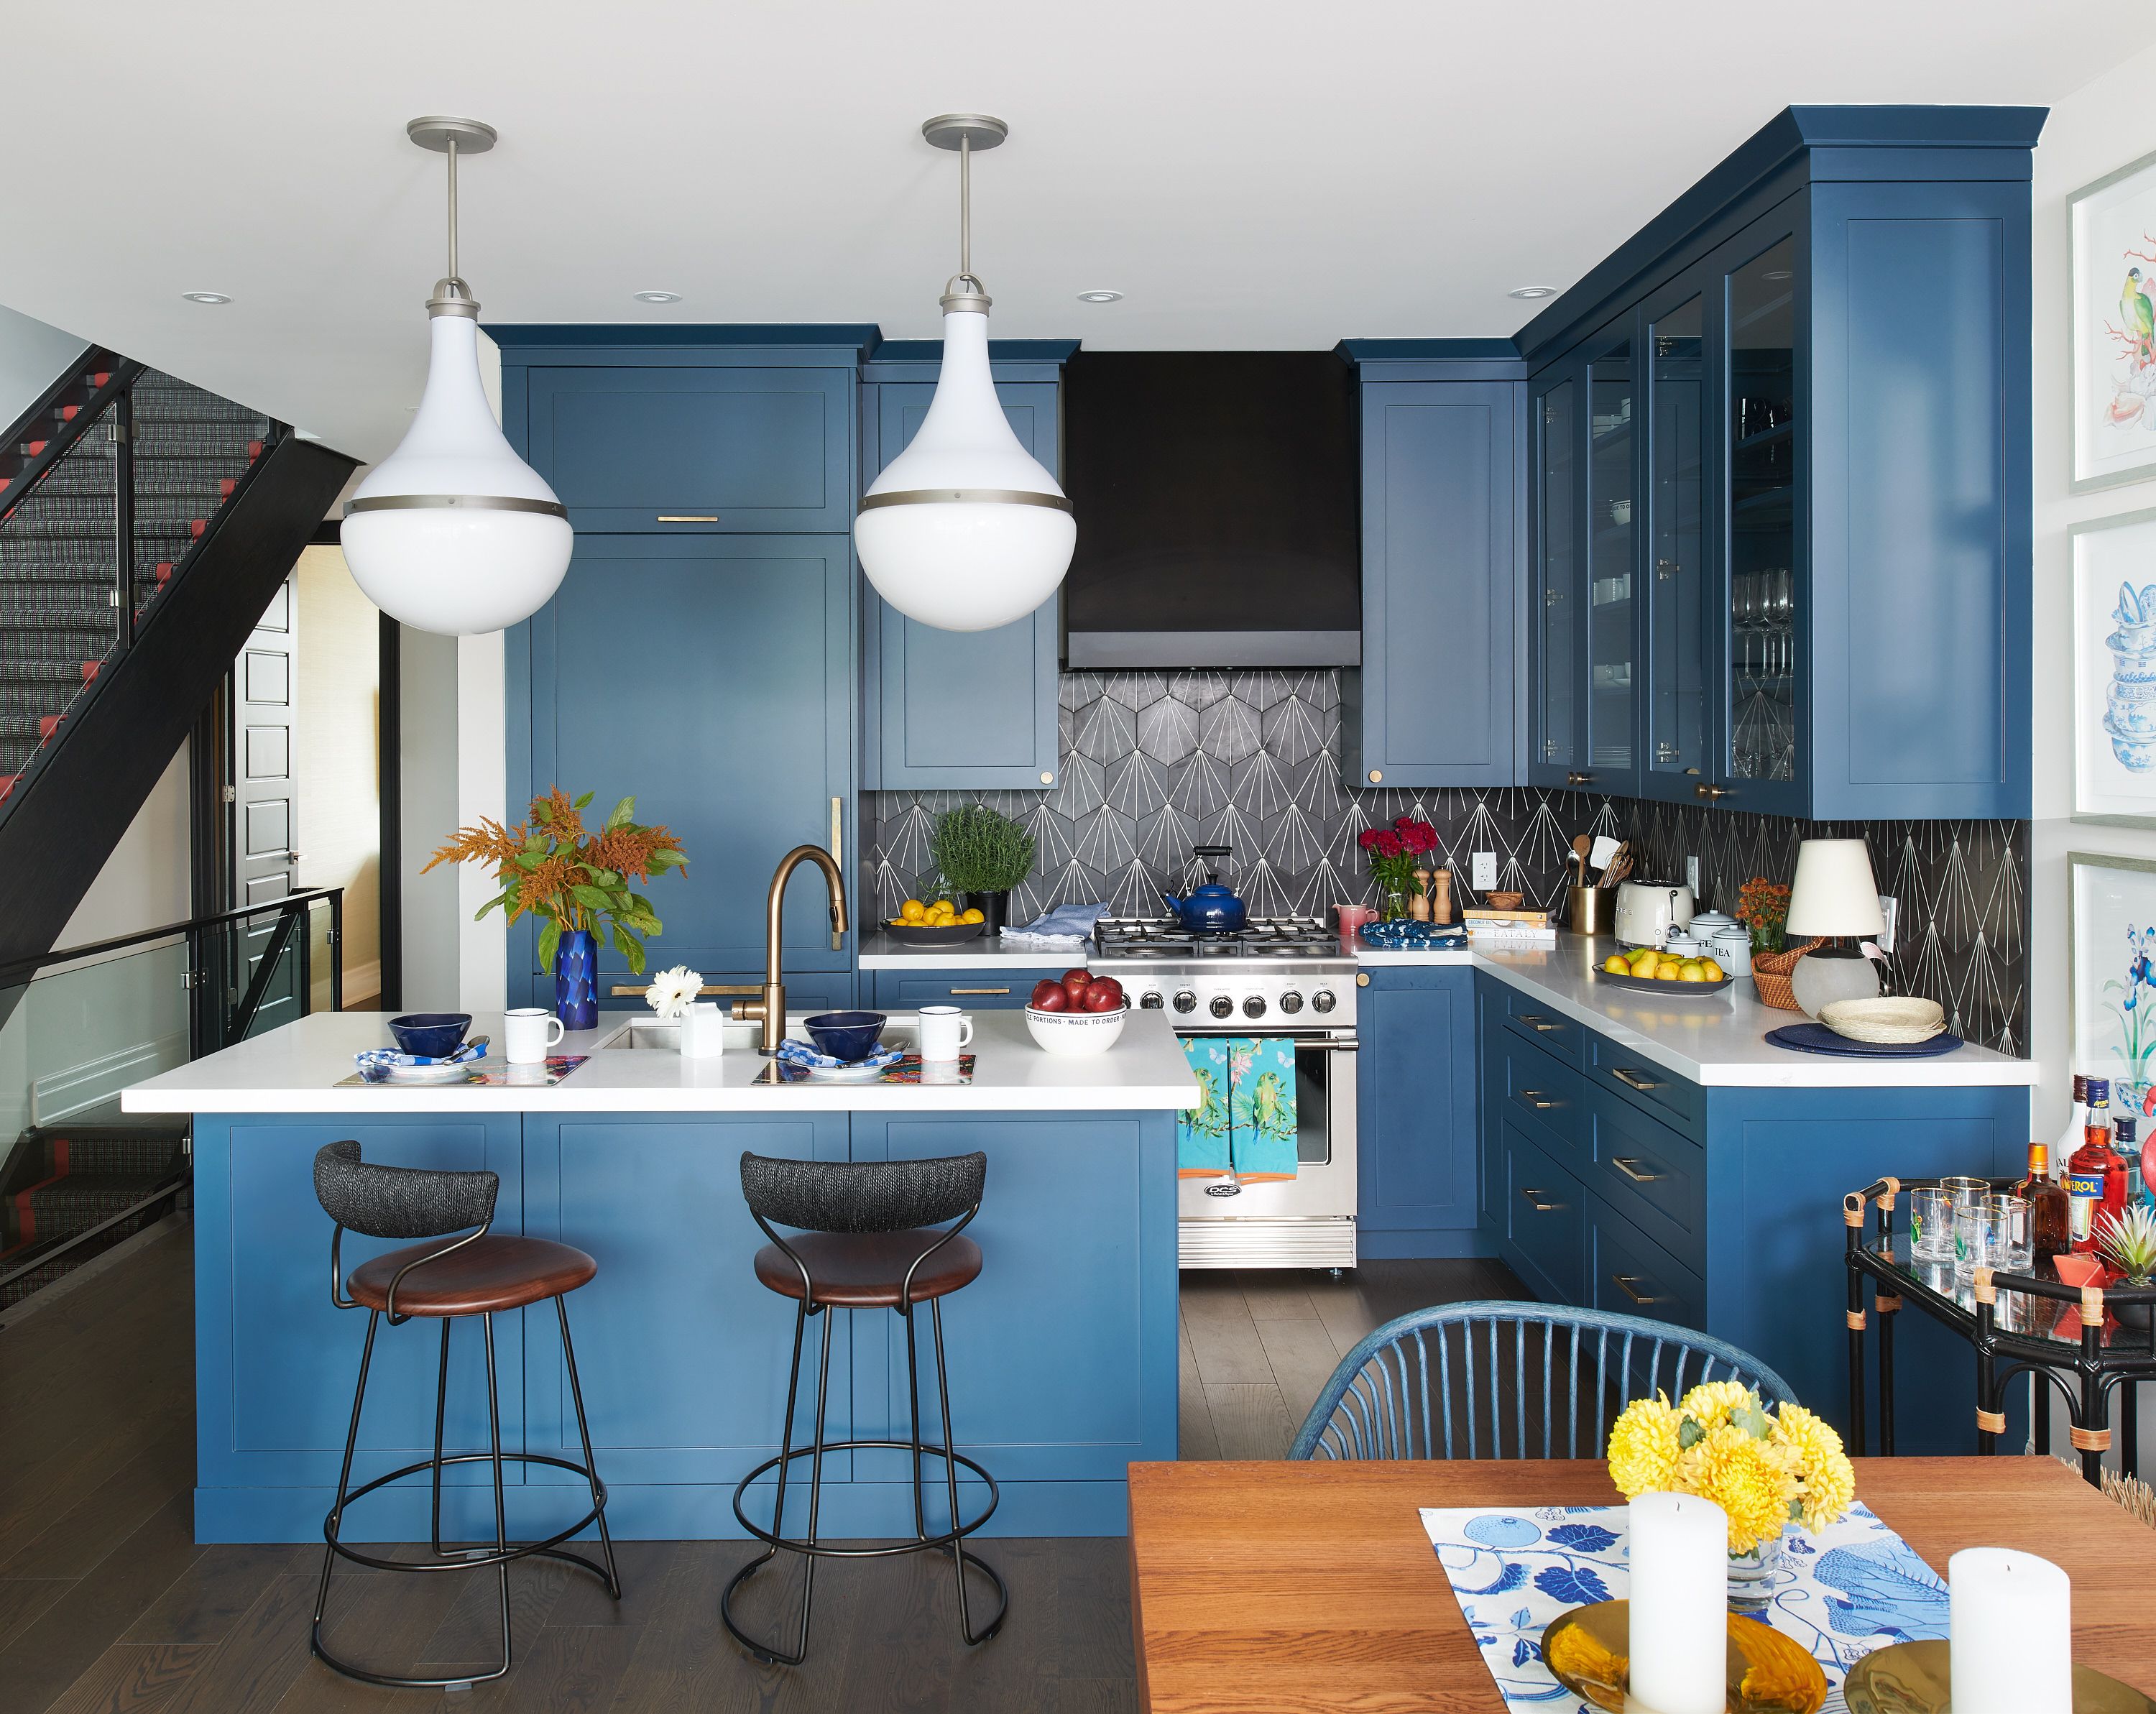 Ready for a Pop of Color in Your Kitchen?